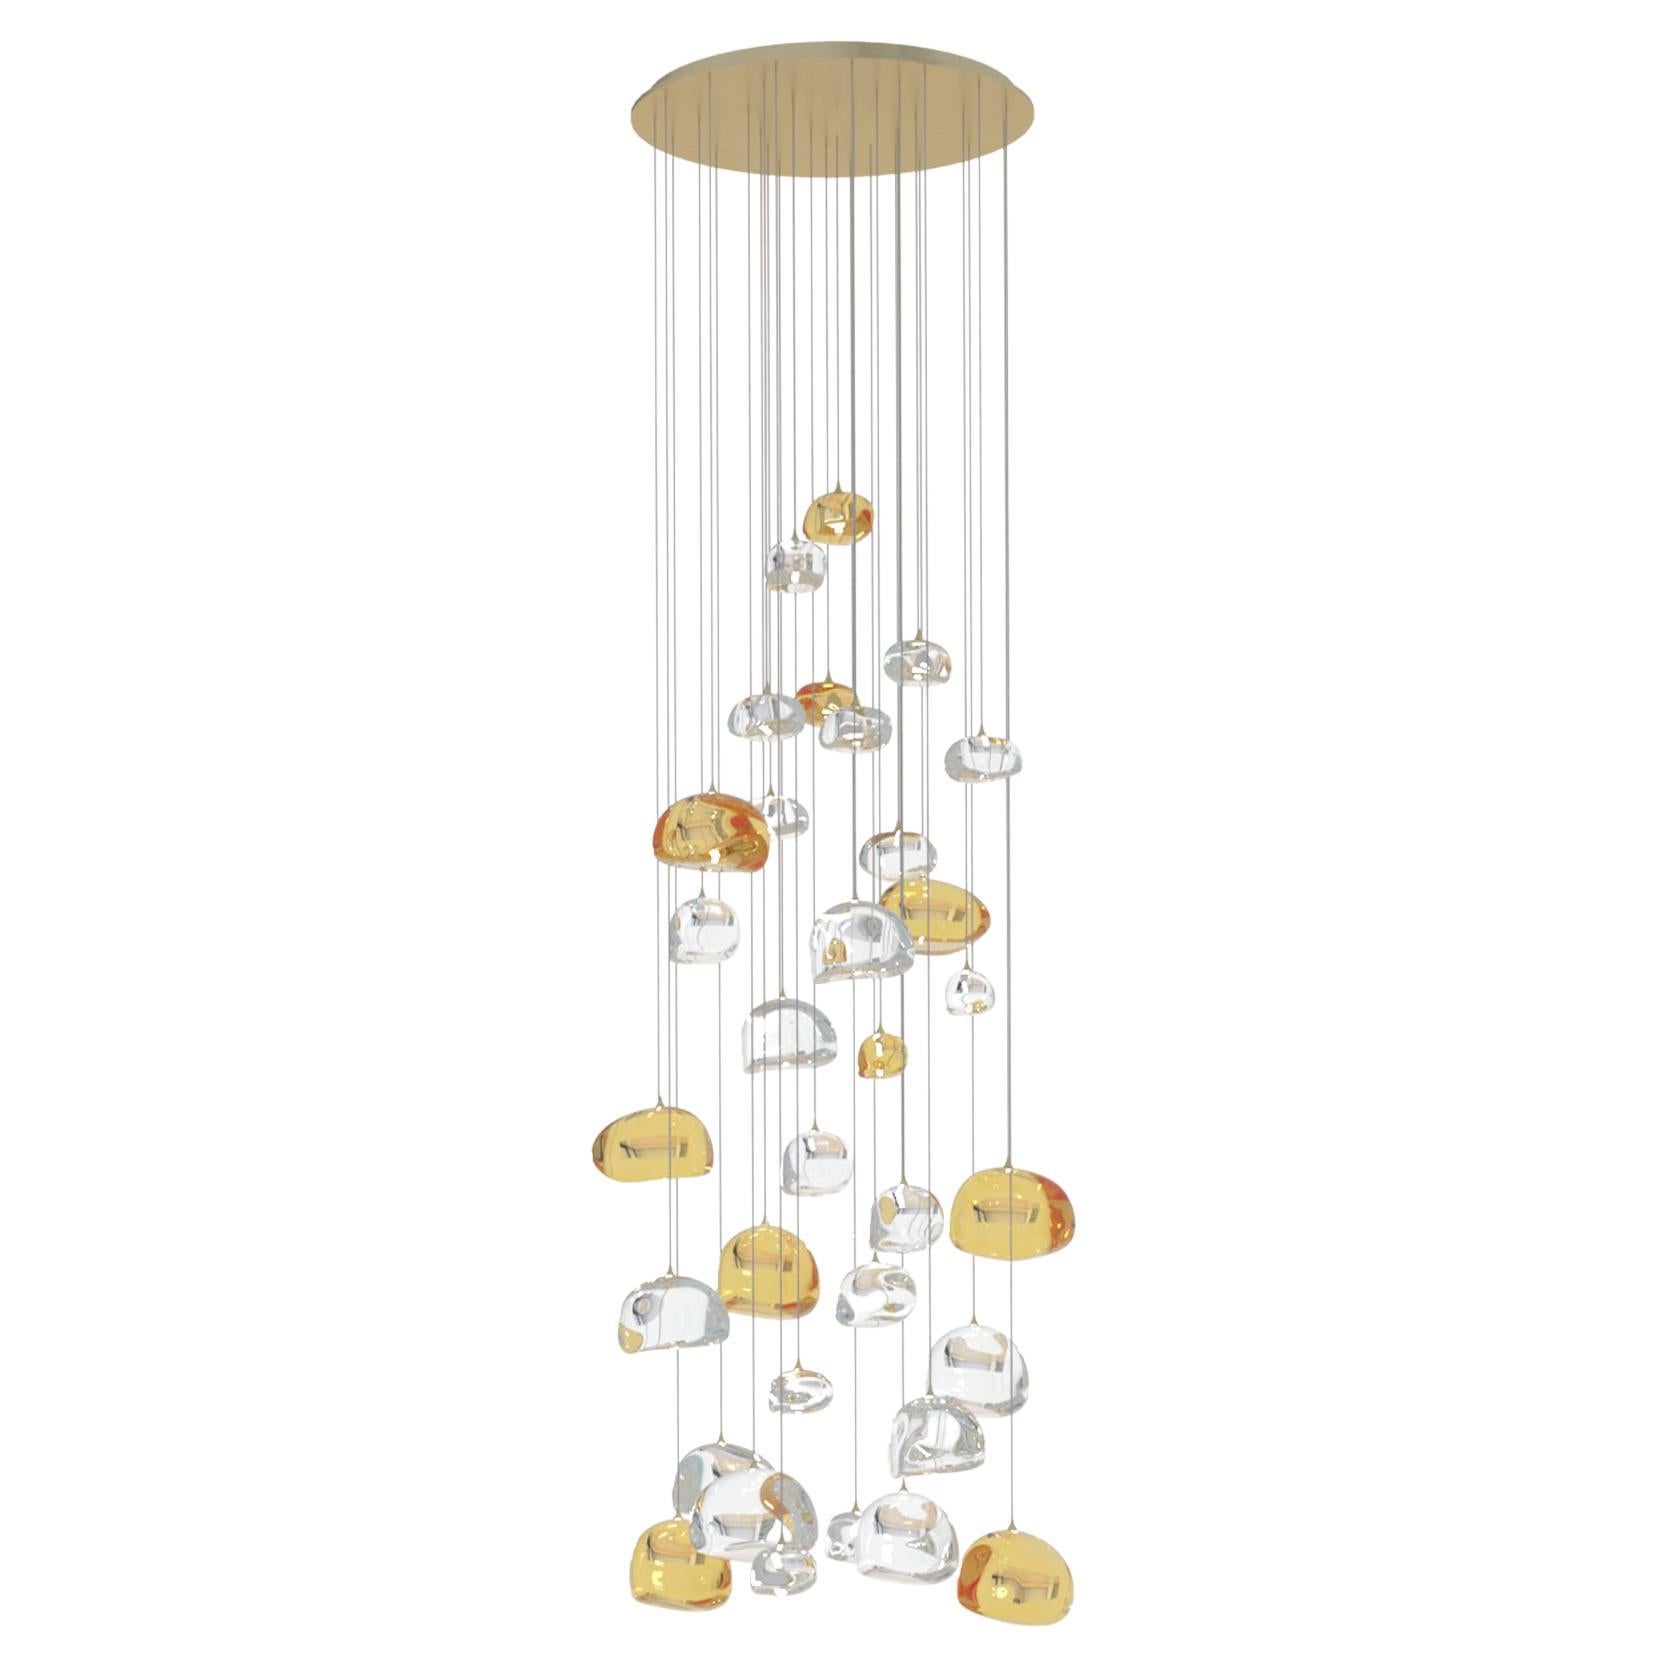 Cloud Chandelier, Large Hand-Blown Glass Pendants with 33 Led Lights, Extra Long